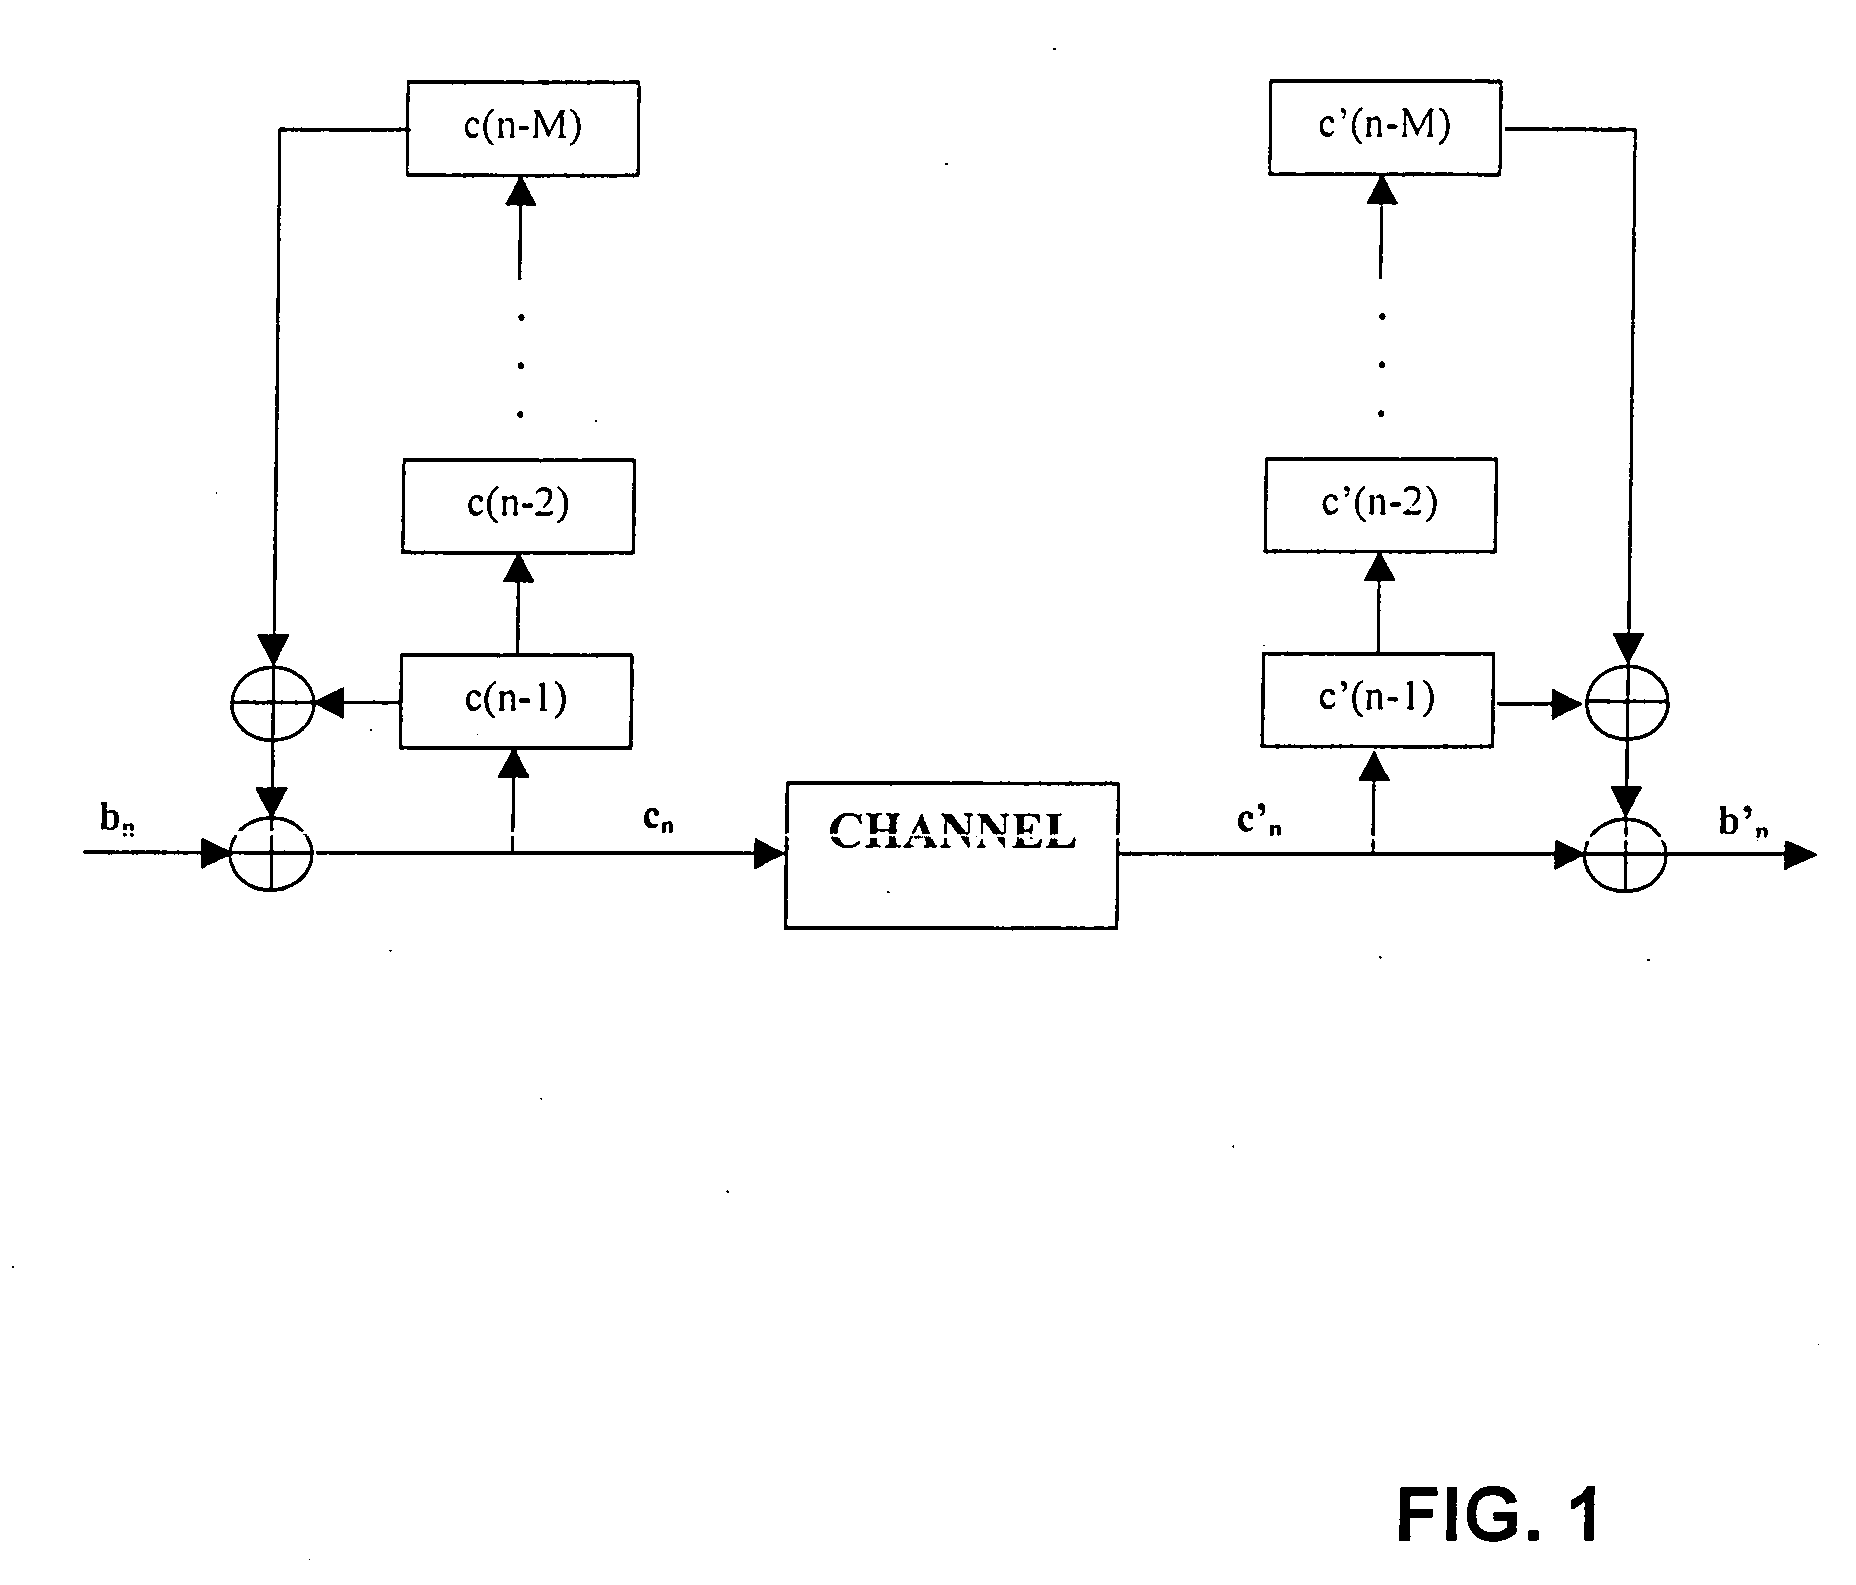 Methods and apparatus for enhancing the robustness of watermark extraction from digital host content